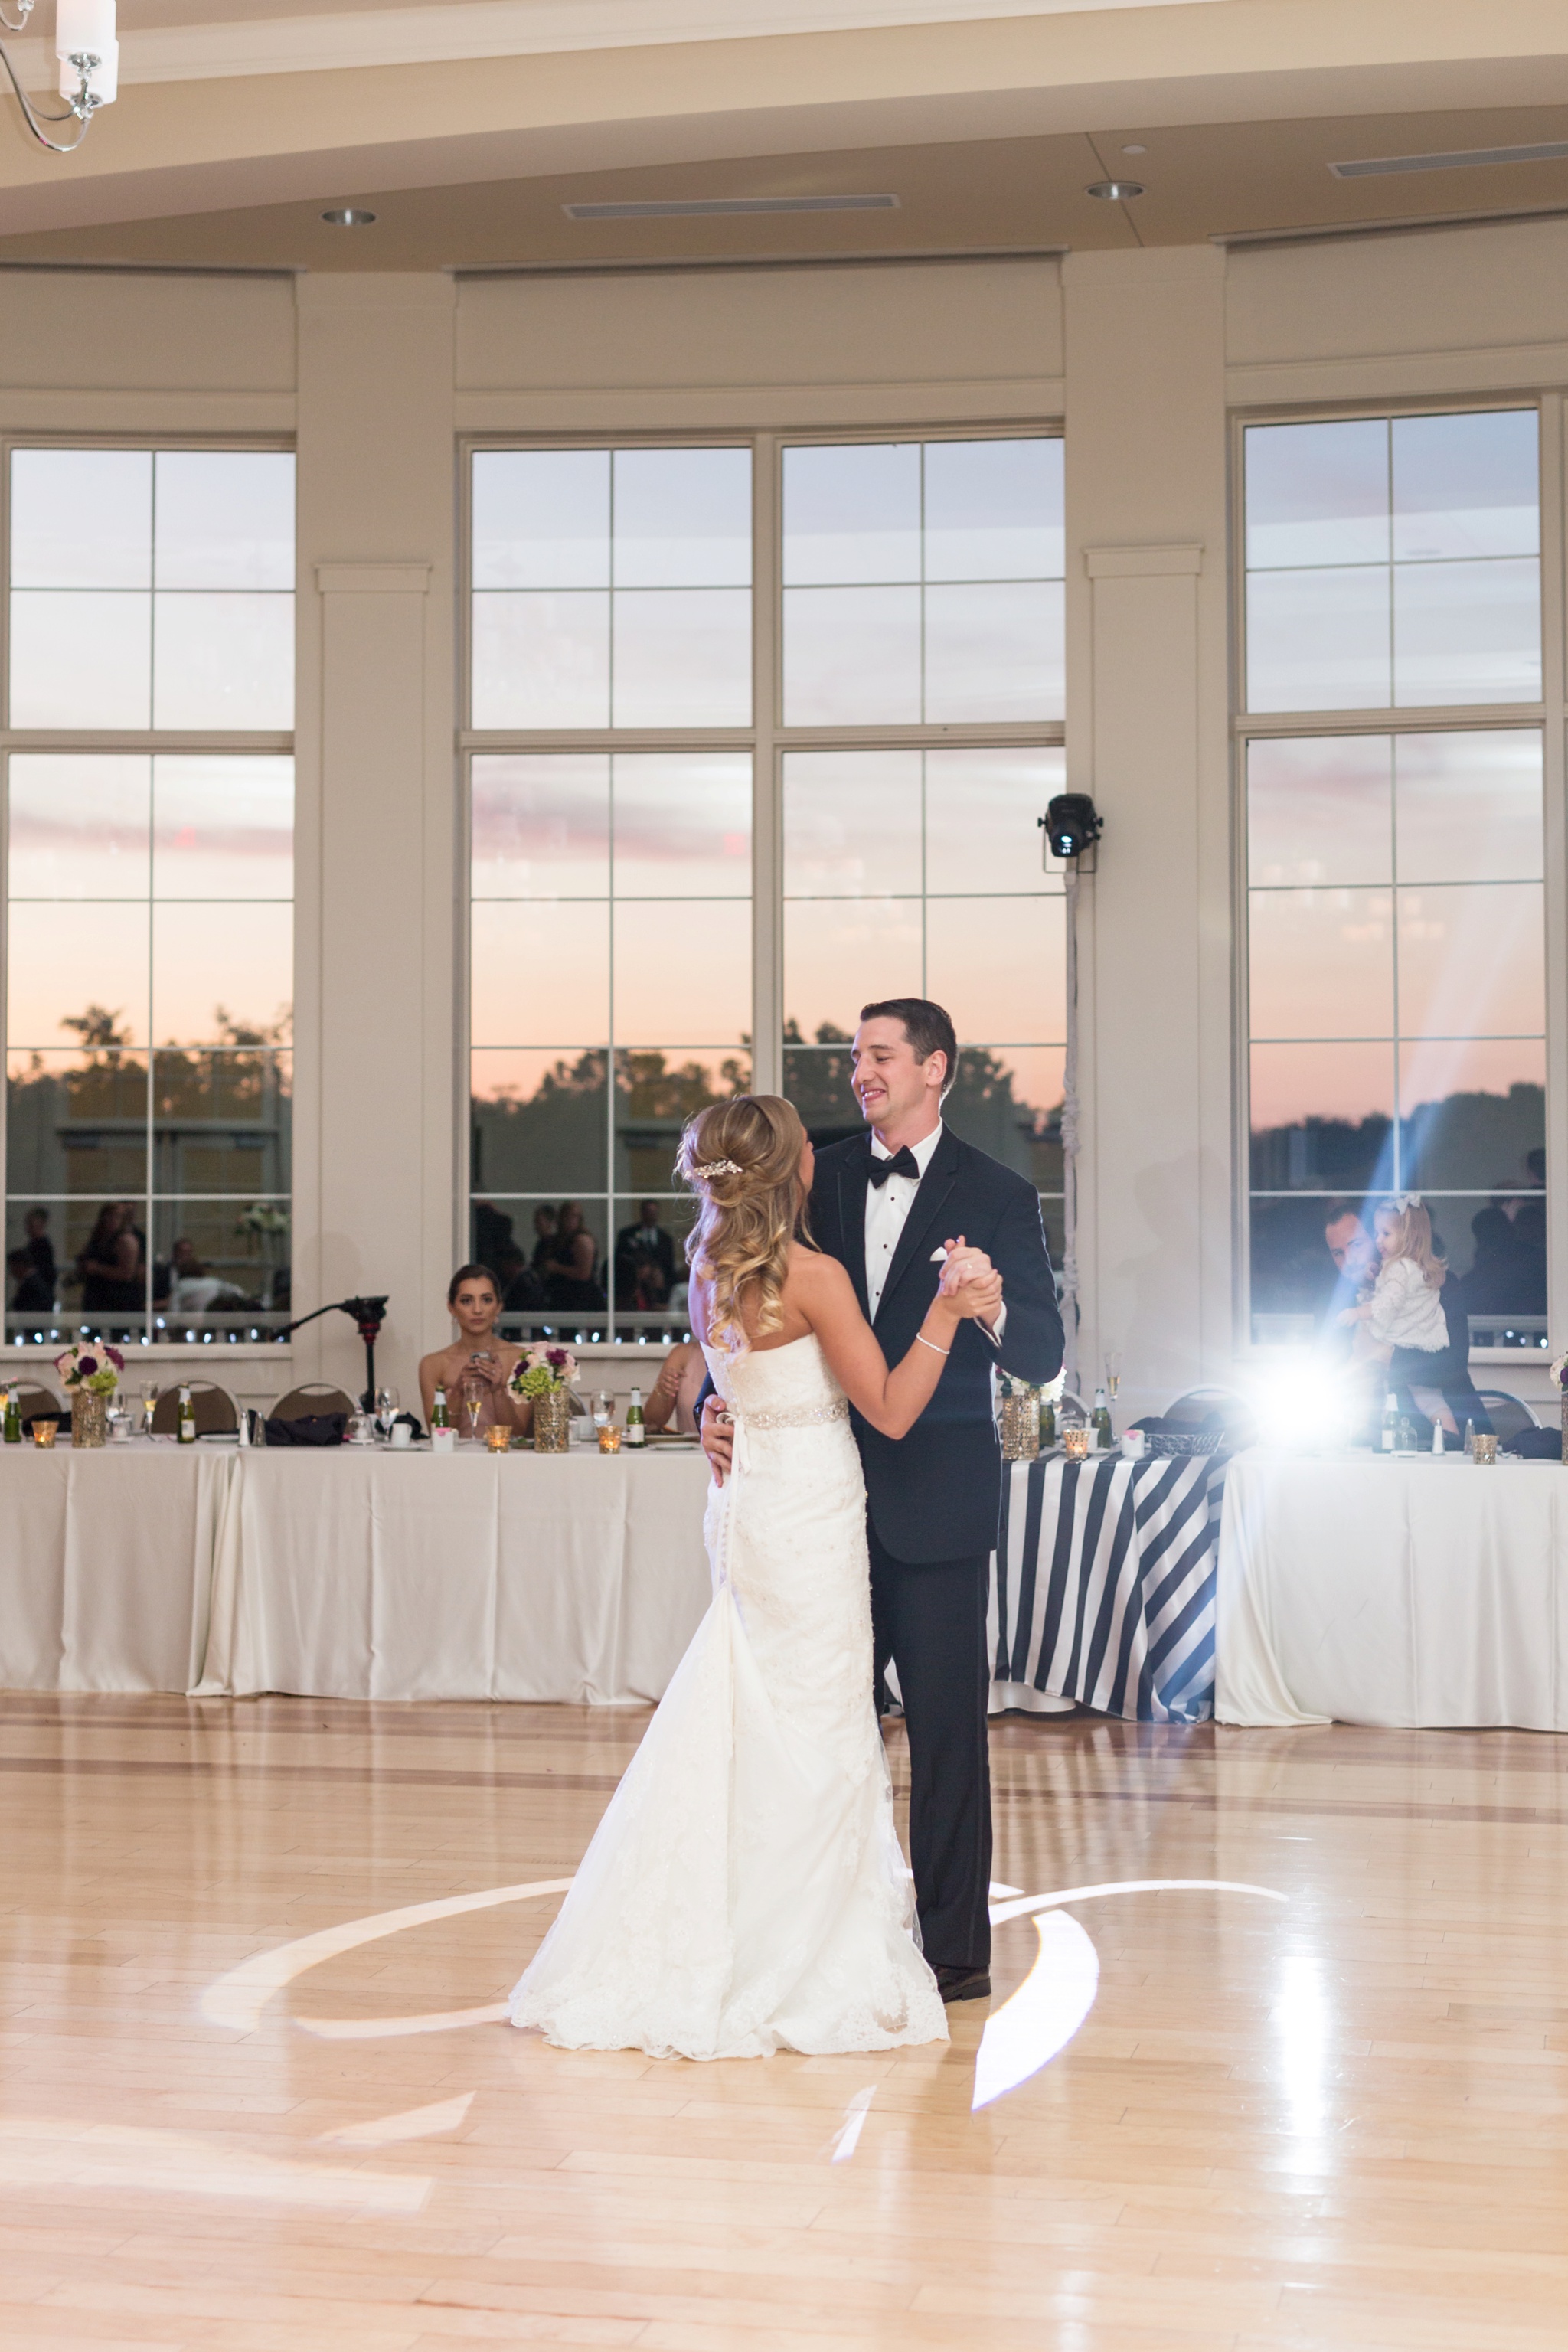 Reception at Cooper Creek Event Center in Blue Ash, First Dance